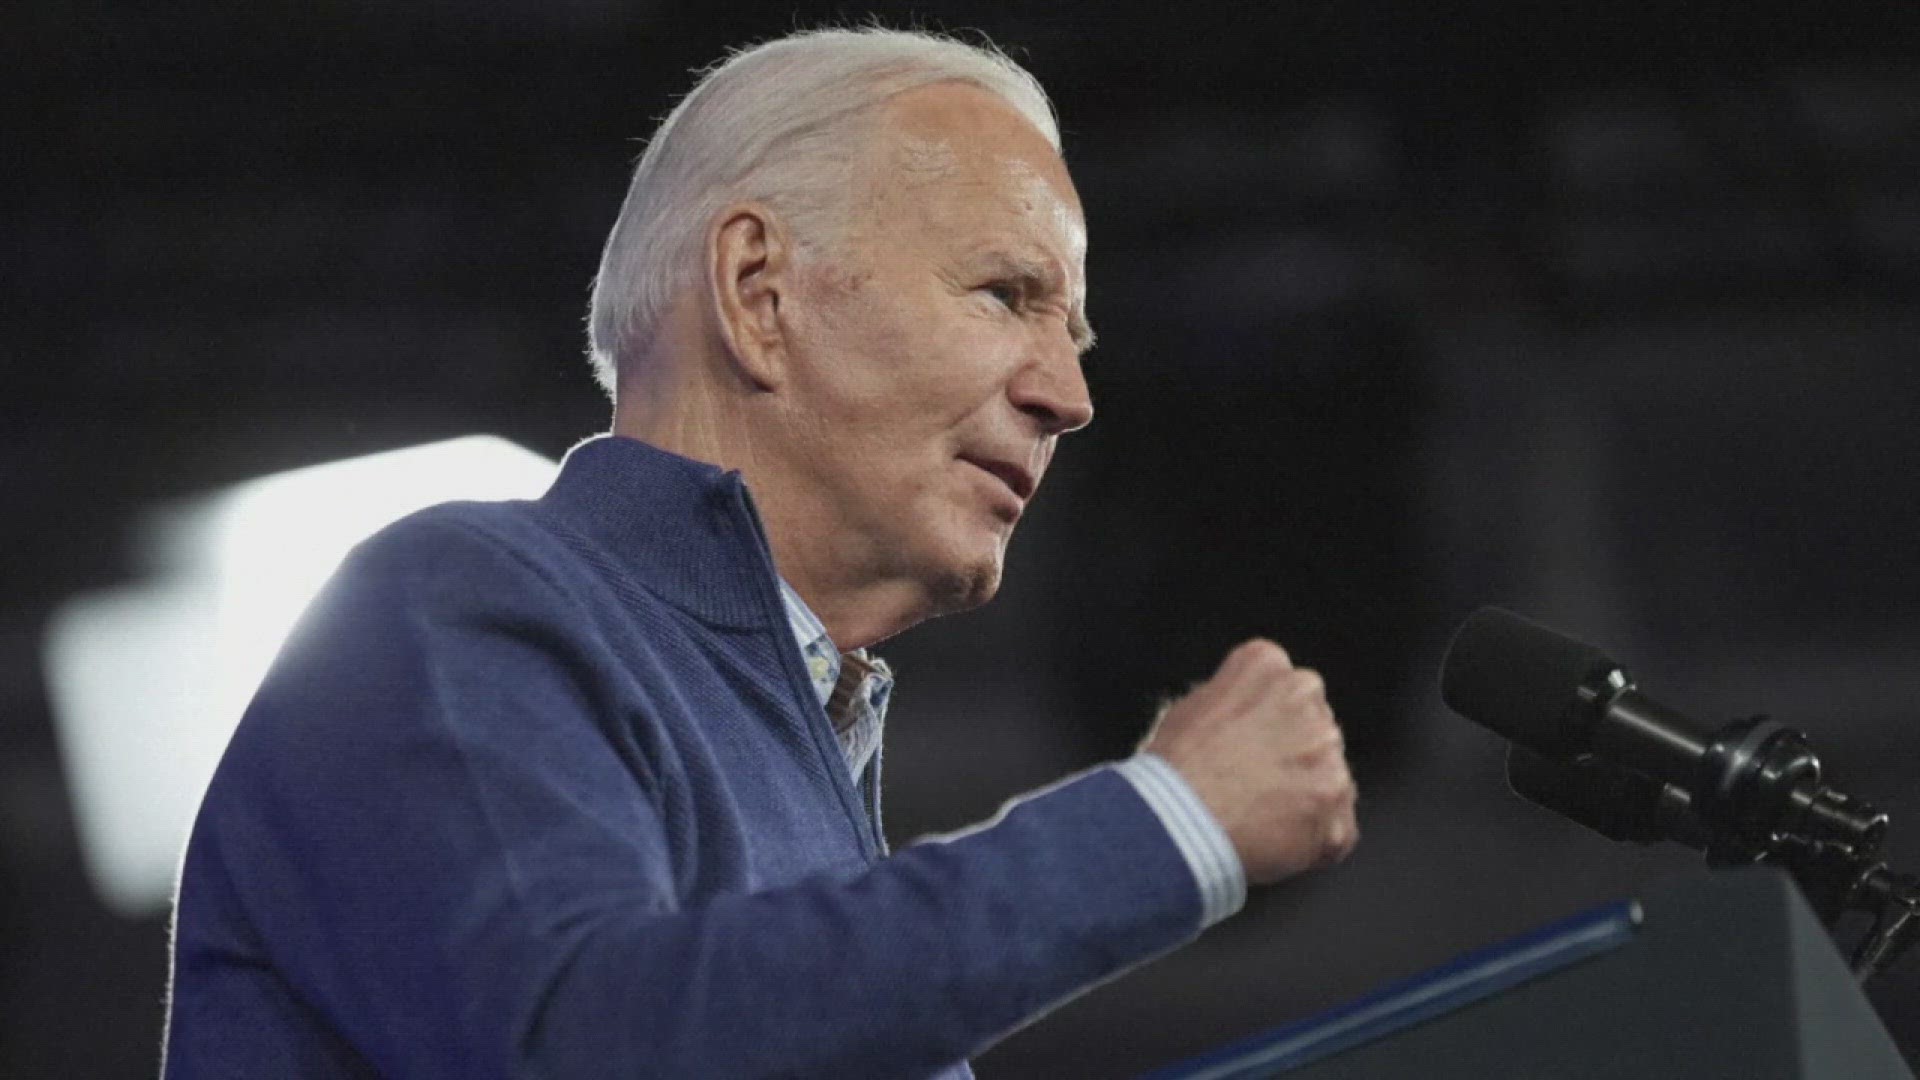 President Biden is sharpening his attacks and laying out his vision for the future as he looks to ramp up his reelection campaign.